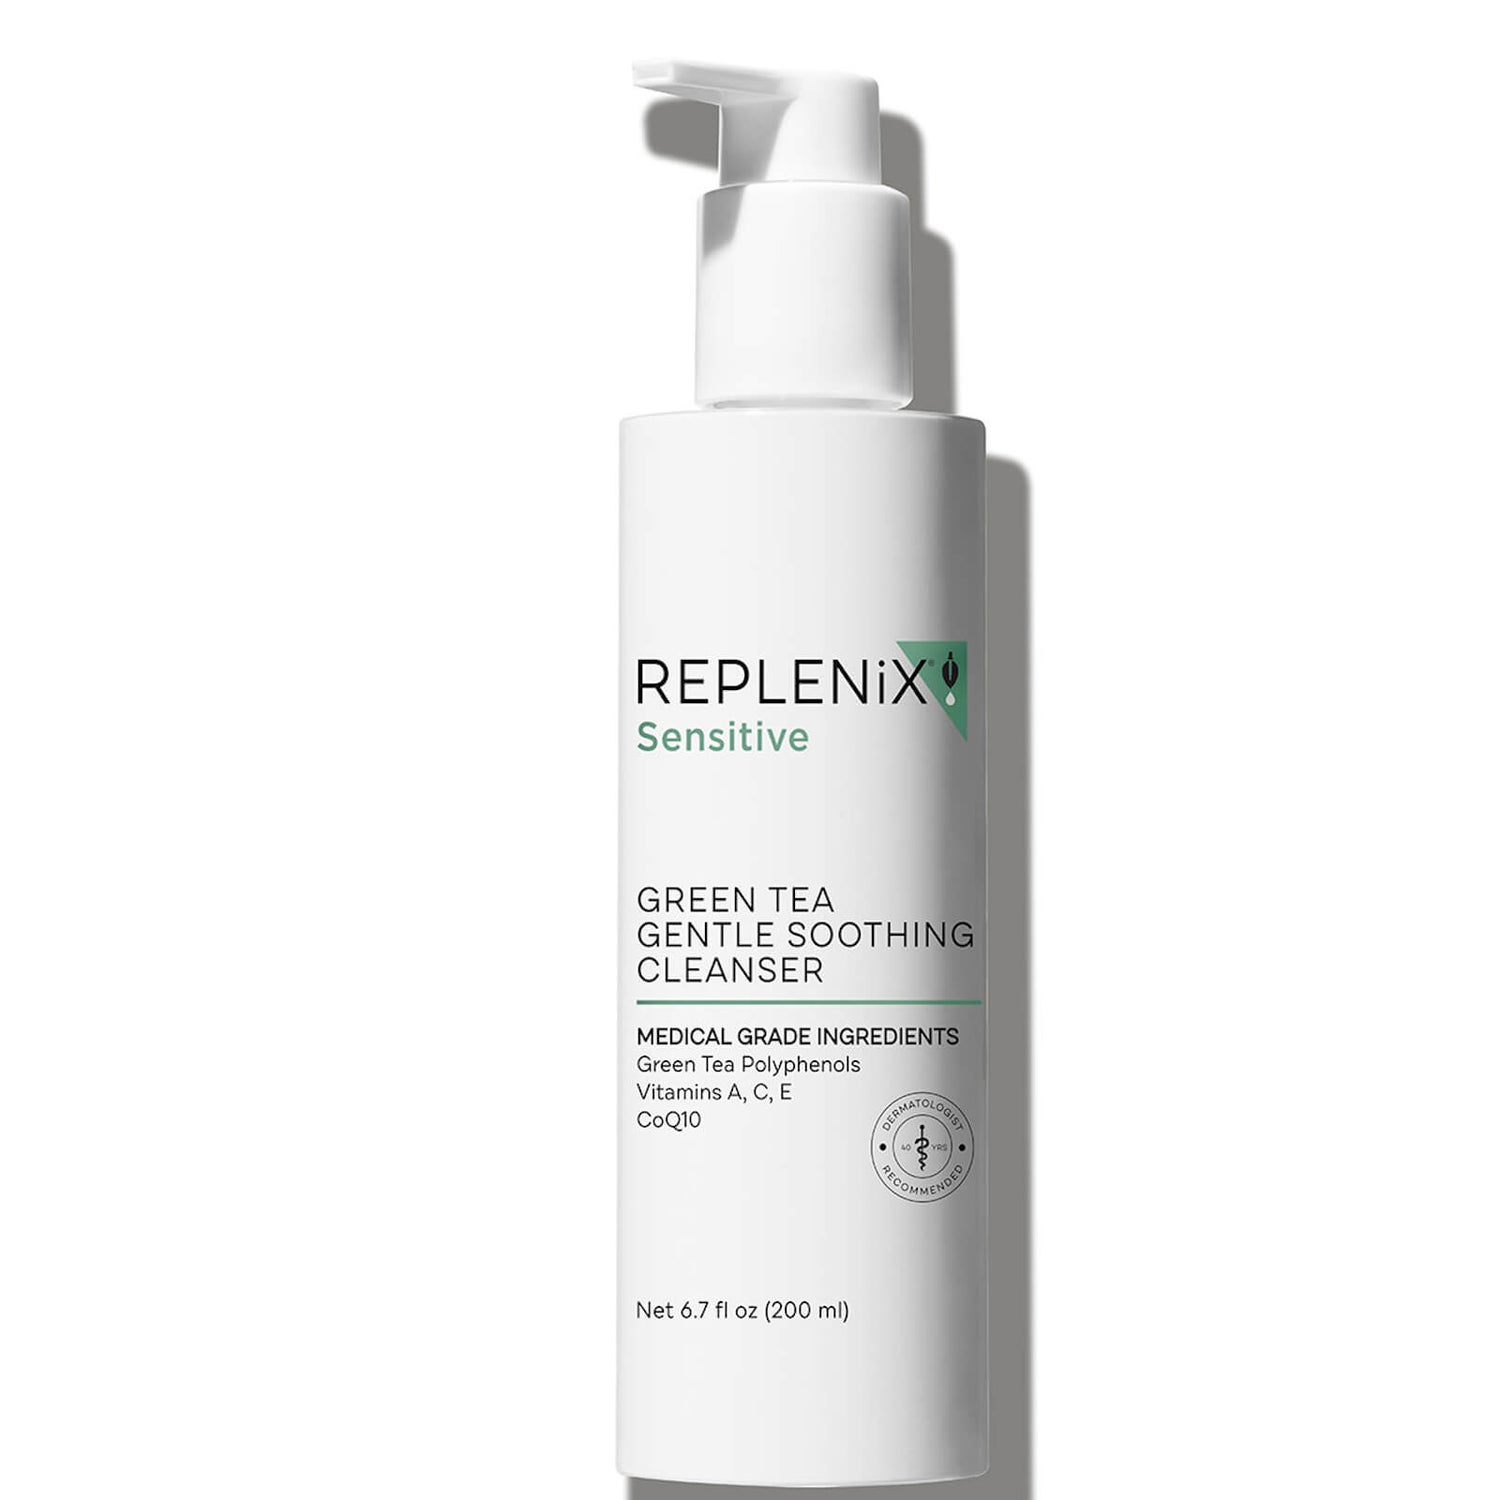 Soothing cleanser. Hydrating Cleanser. Replenix. Replenix Anti Aging. Phyto-c Soothing Cleanser.